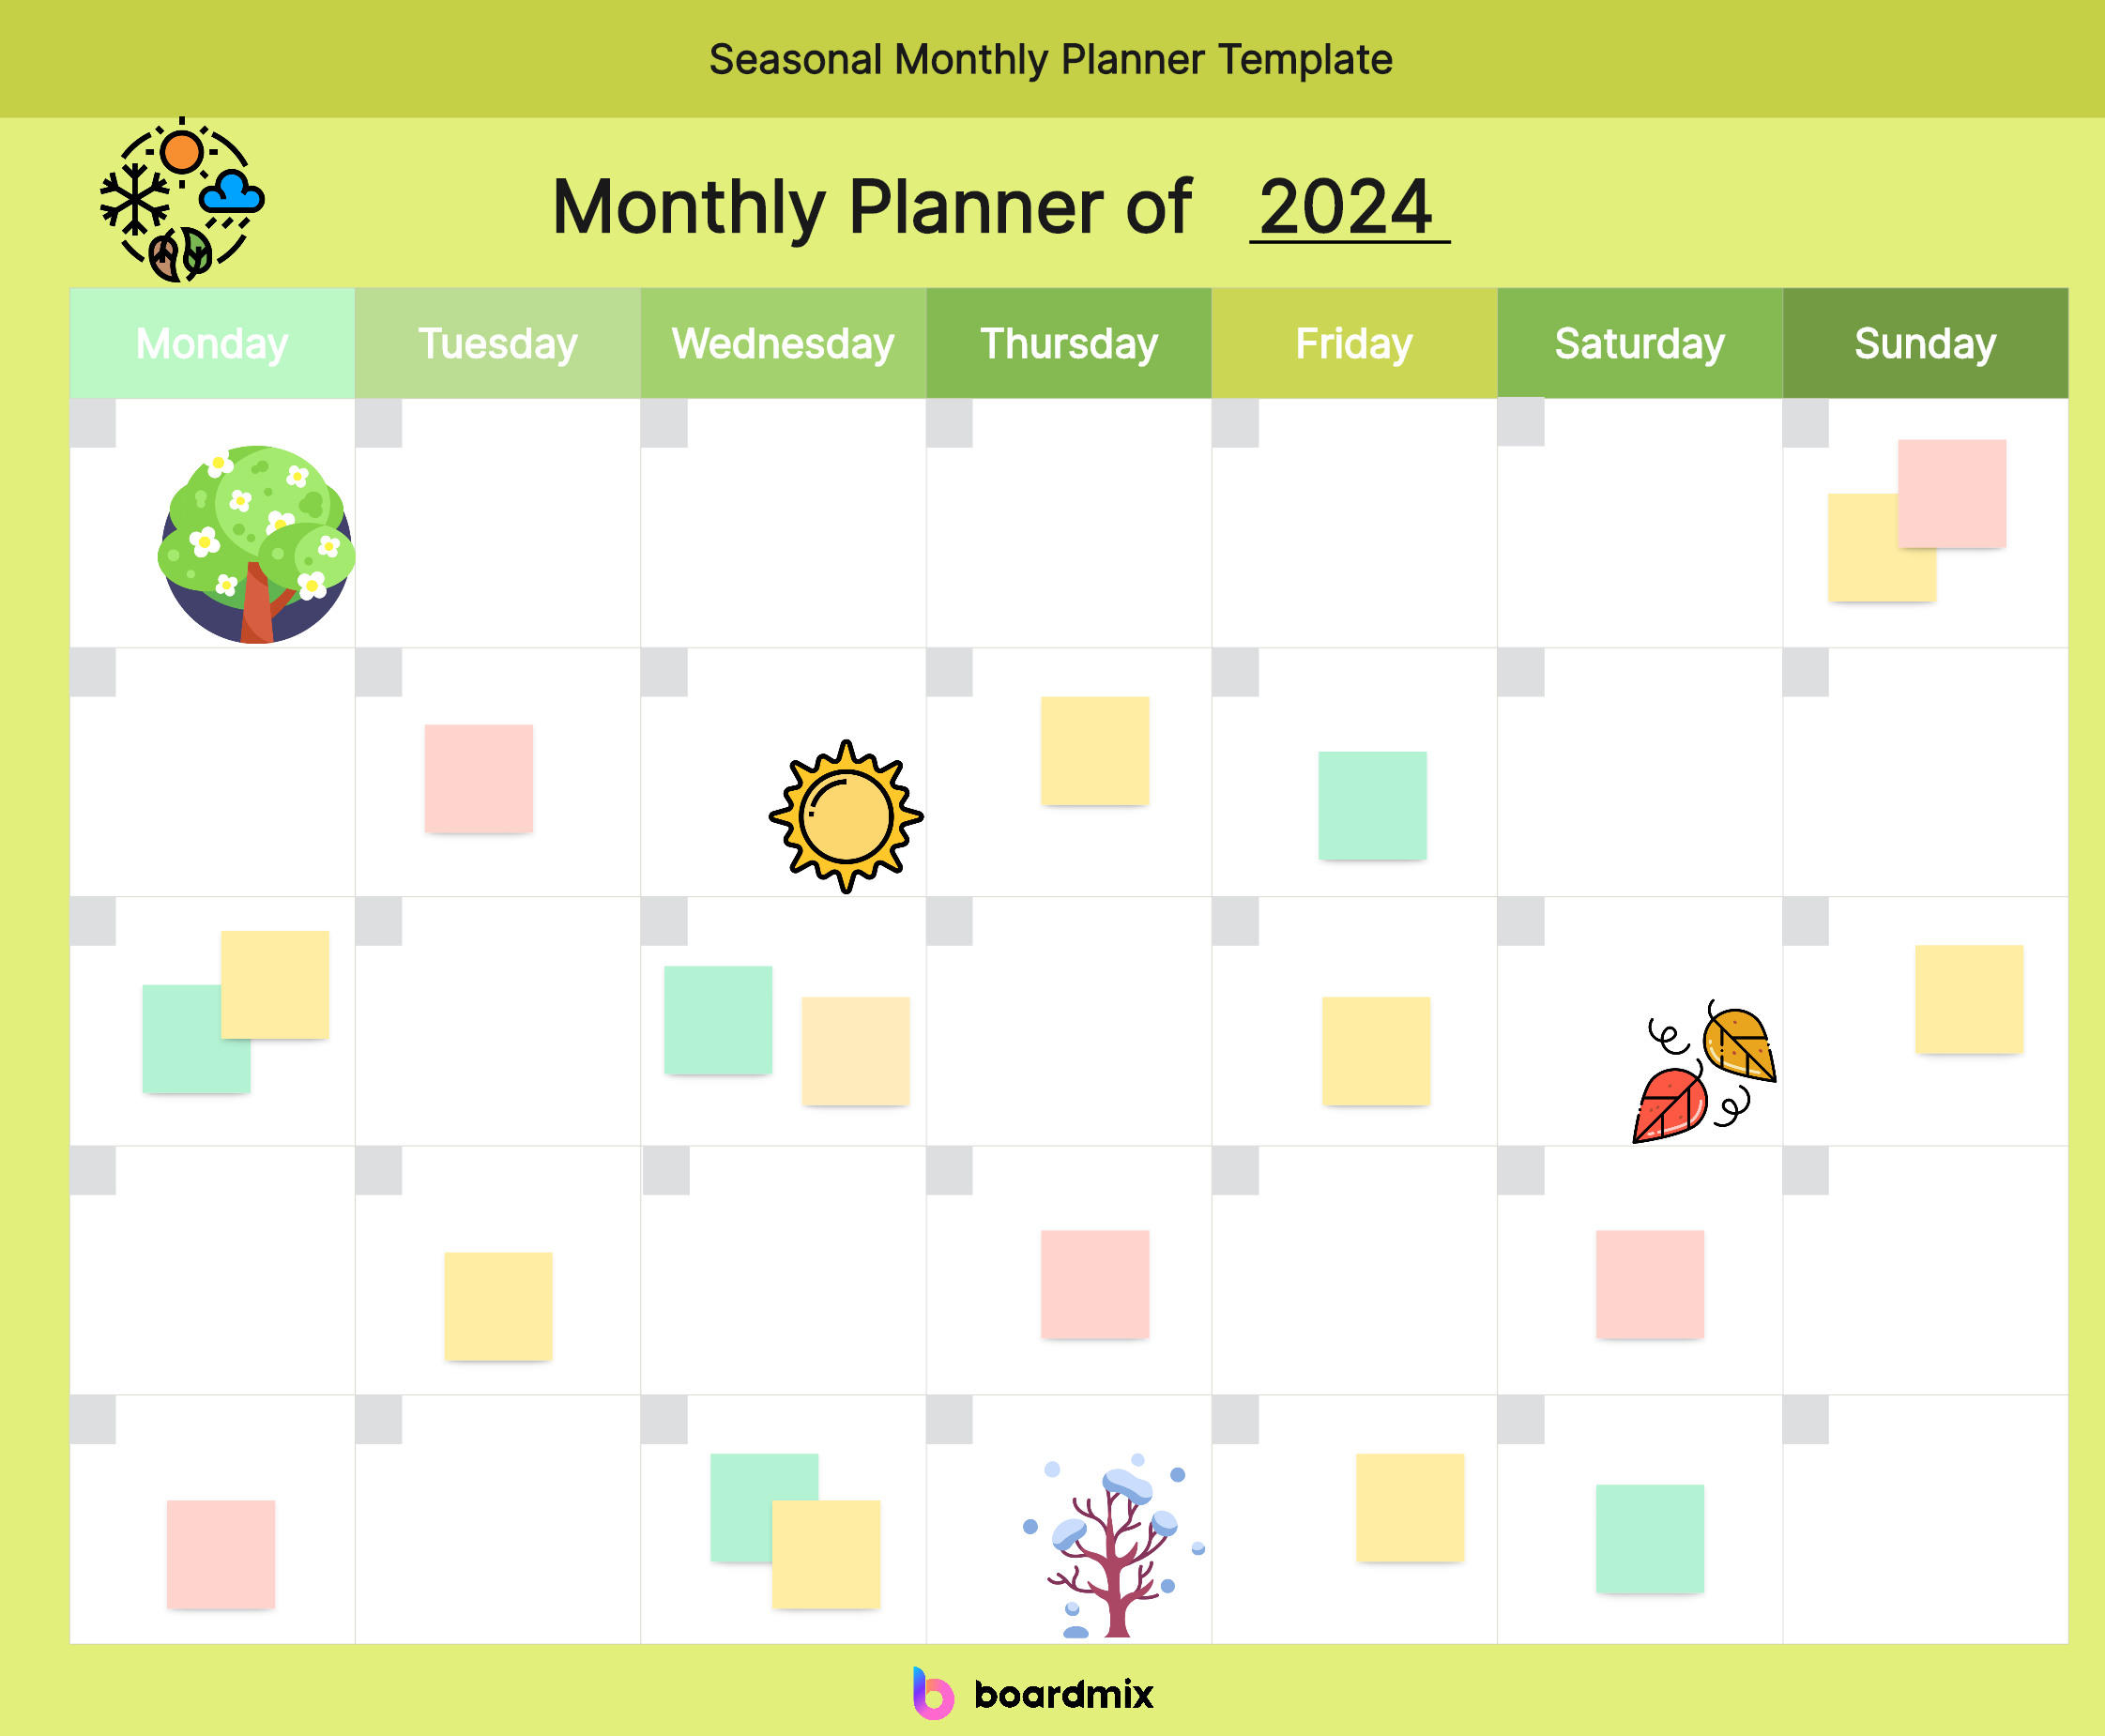 seasonal-monthly-planner-template.png